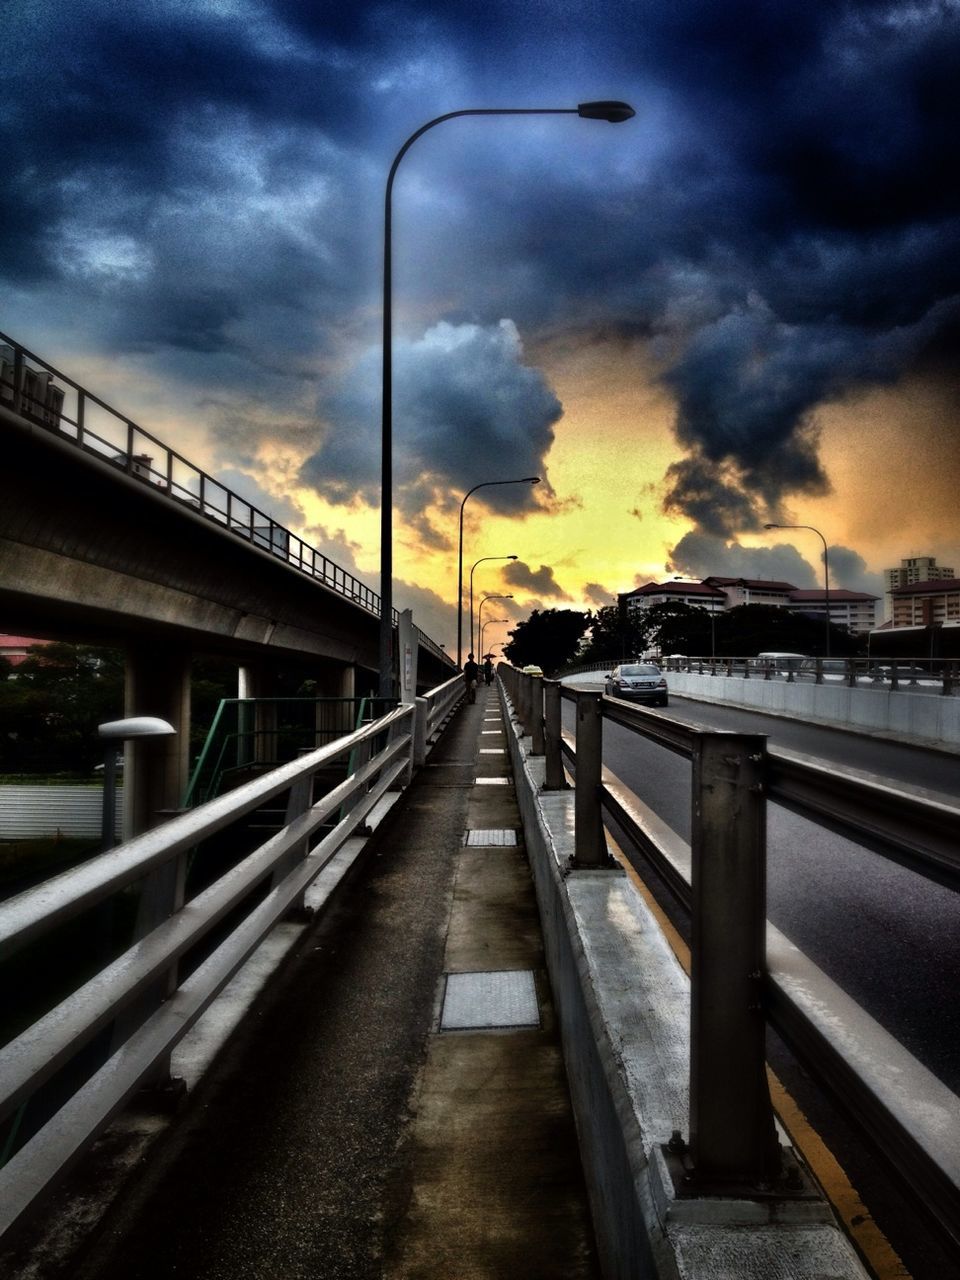 sky, cloud - sky, built structure, architecture, cloudy, transportation, railing, the way forward, connection, bridge - man made structure, street light, cloud, sunset, diminishing perspective, railroad track, rail transportation, weather, overcast, dramatic sky, dusk